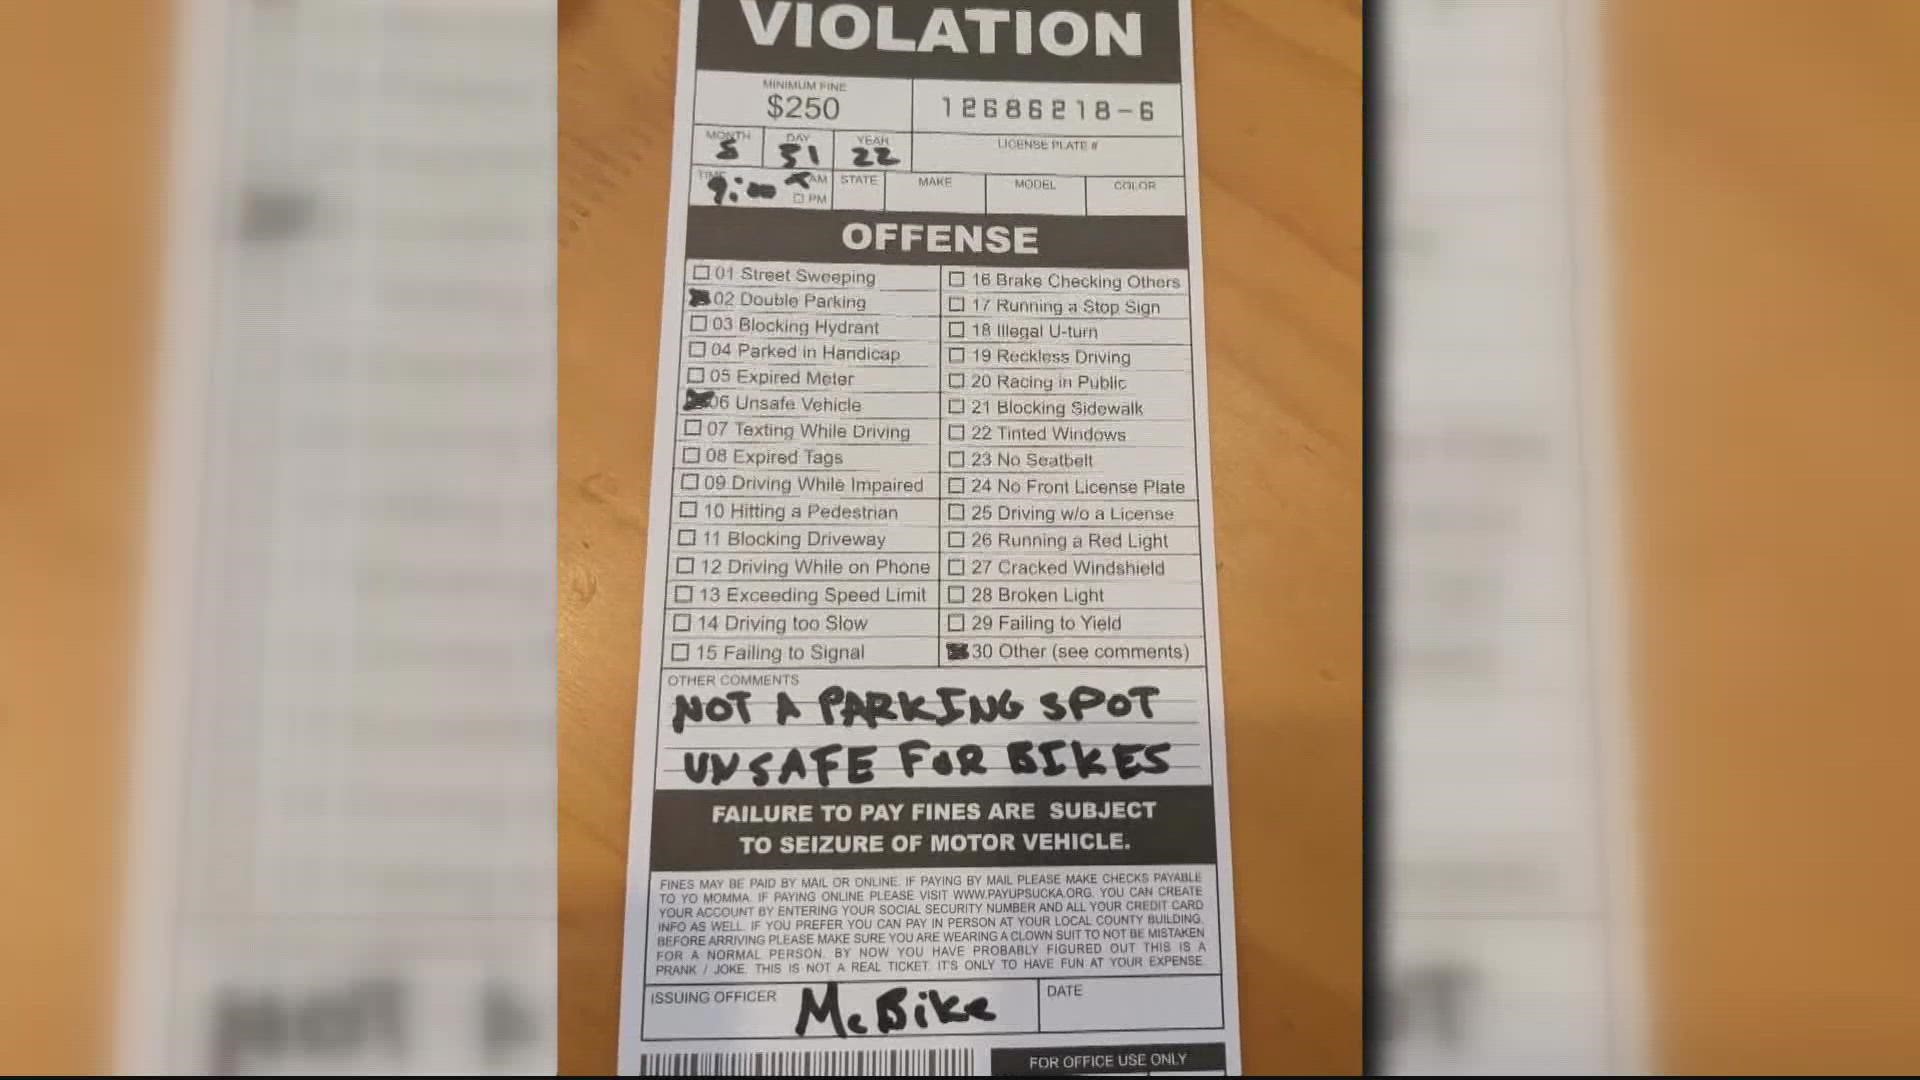 Mark Sussman bought fake parking tickets he found online and placed them on cars illegally parking in the pedestrian activation space.